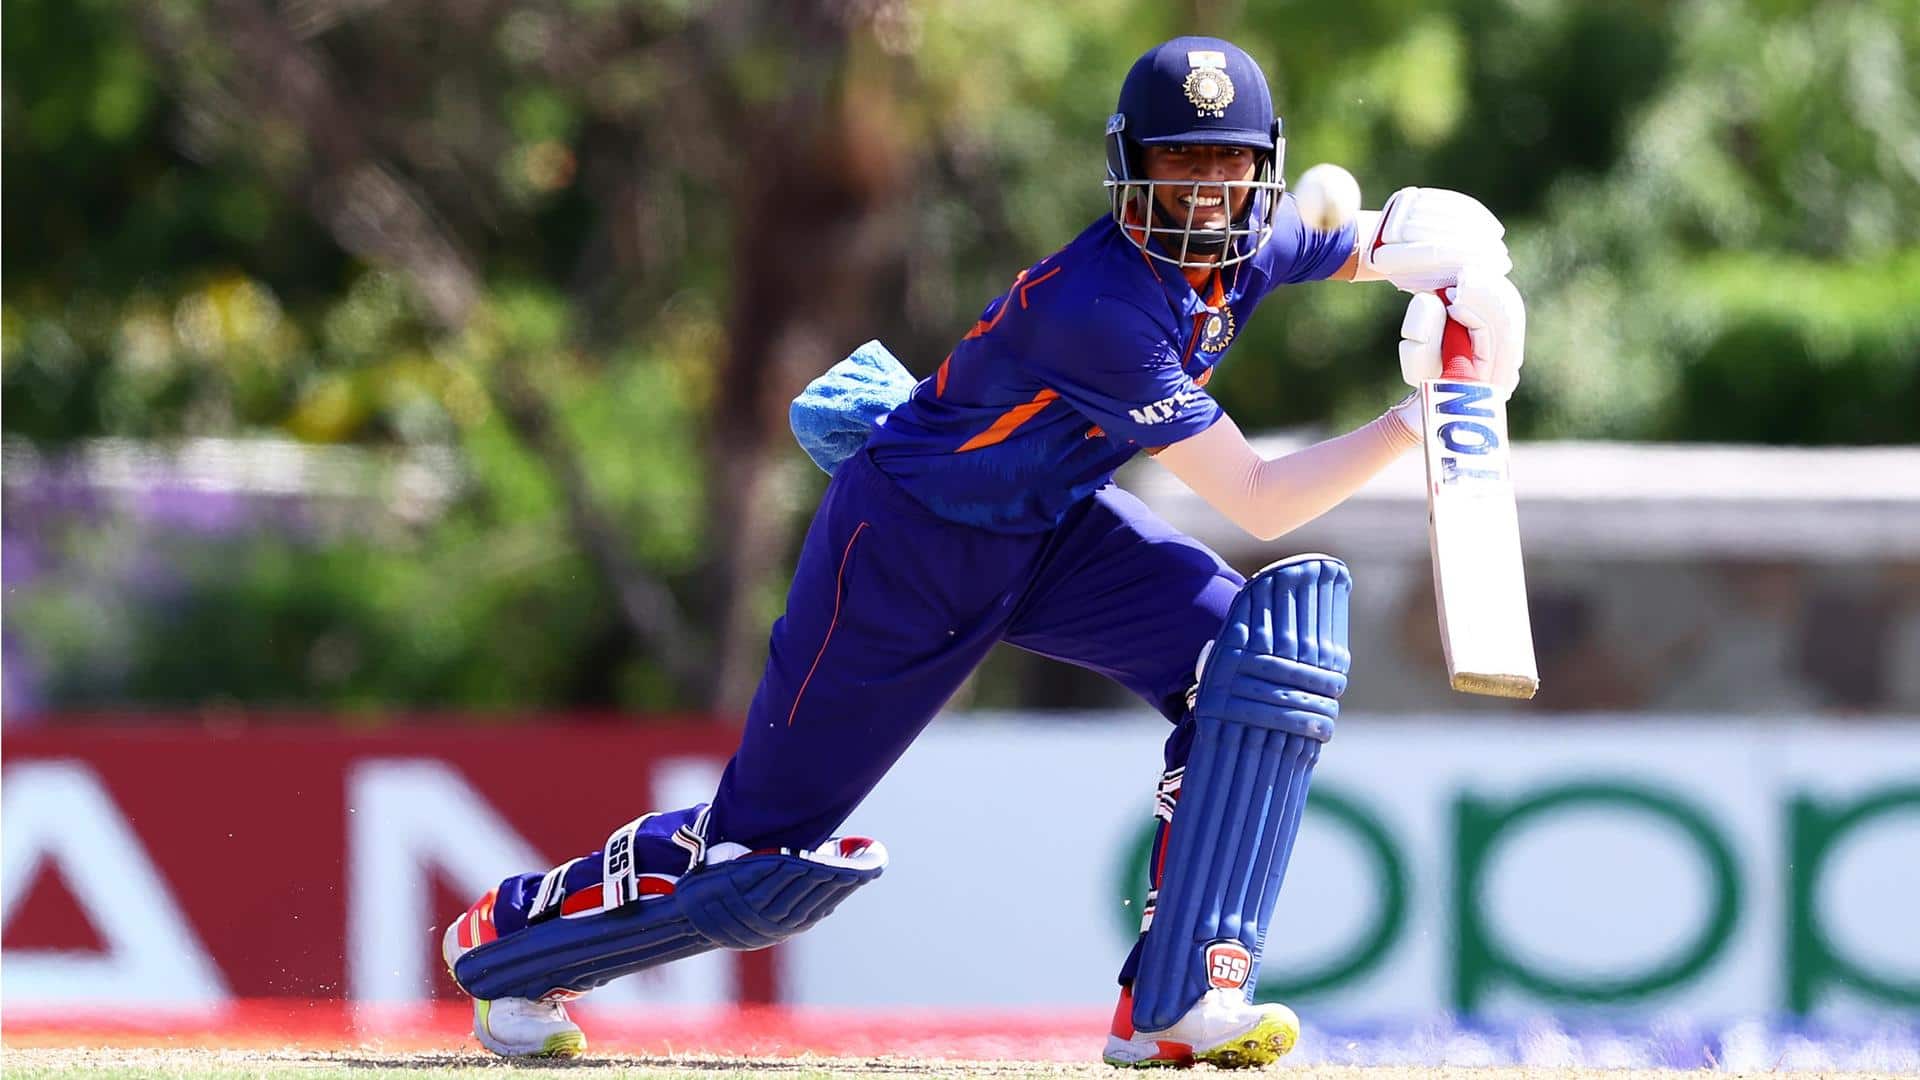 Emerging Asia Cup: Yash Dhull slams his maiden List-A century